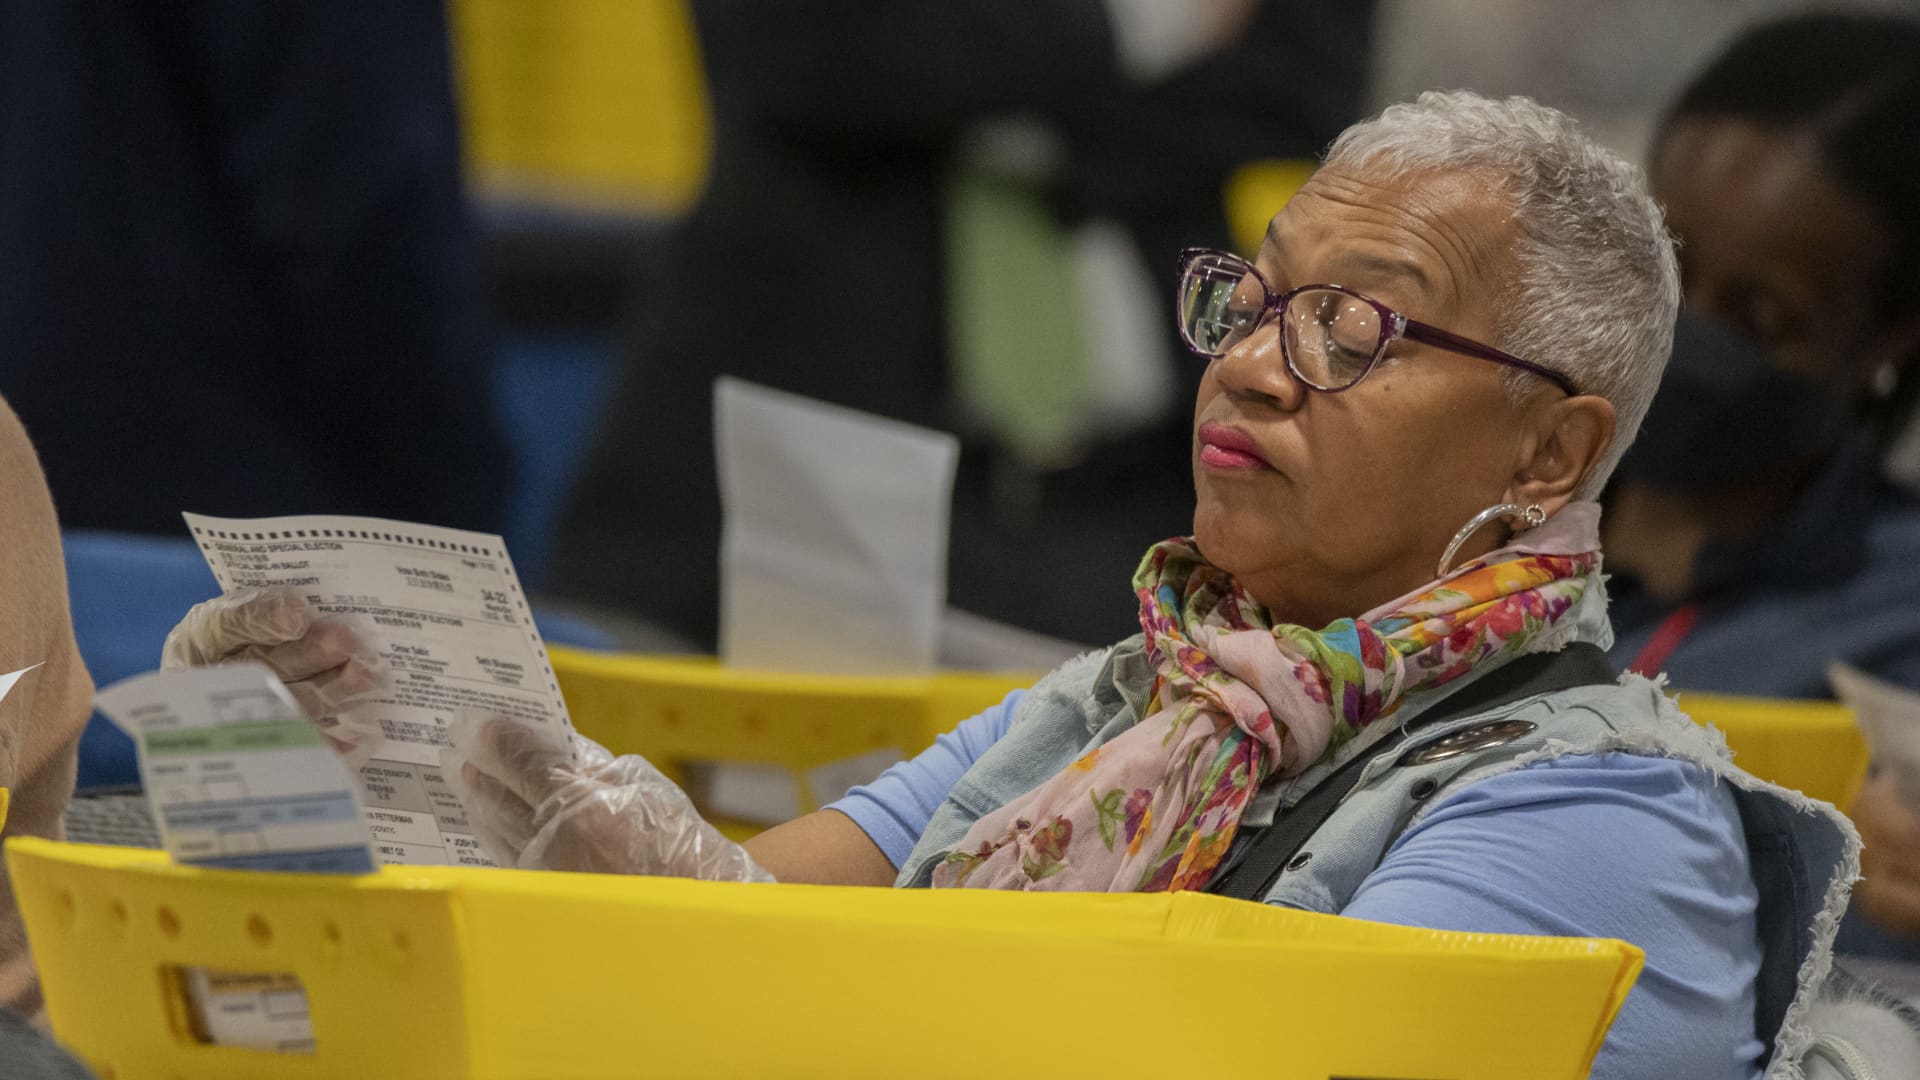 An election worker prepare ballots to be scanned at the Philadelphia Ballot Processing Center in Philadelphia, Pennsylvania, US, on Tuesday, Nov. 8, 2022.